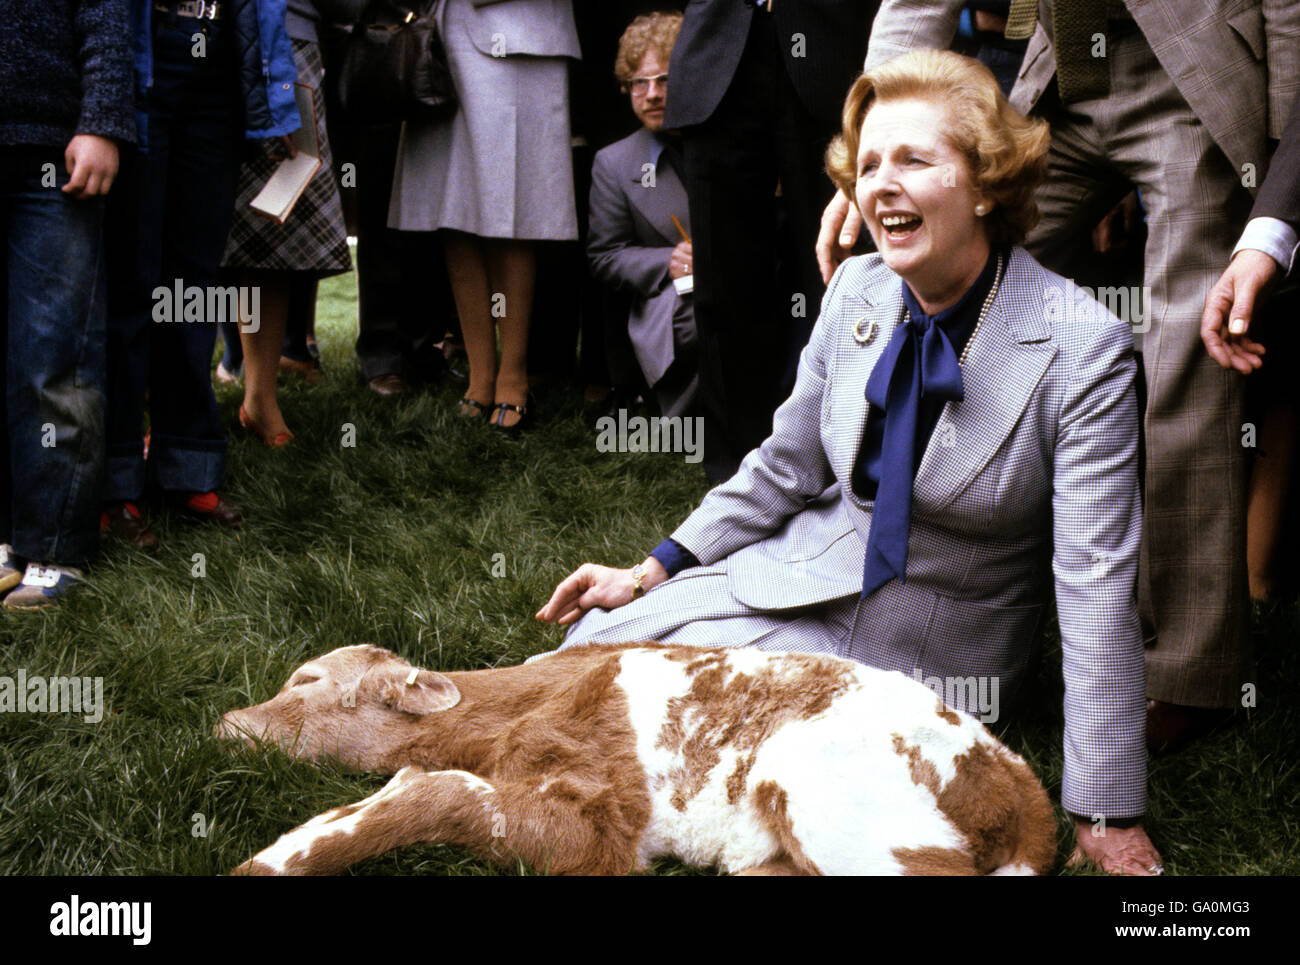 Margaret Thatcher greets Maggie, a sleepy Charolais calf only 12 hours old, at Willisham Farm, Ipswich, during the Conservative leader's electioneering tour of East Anglia. Stock Photo